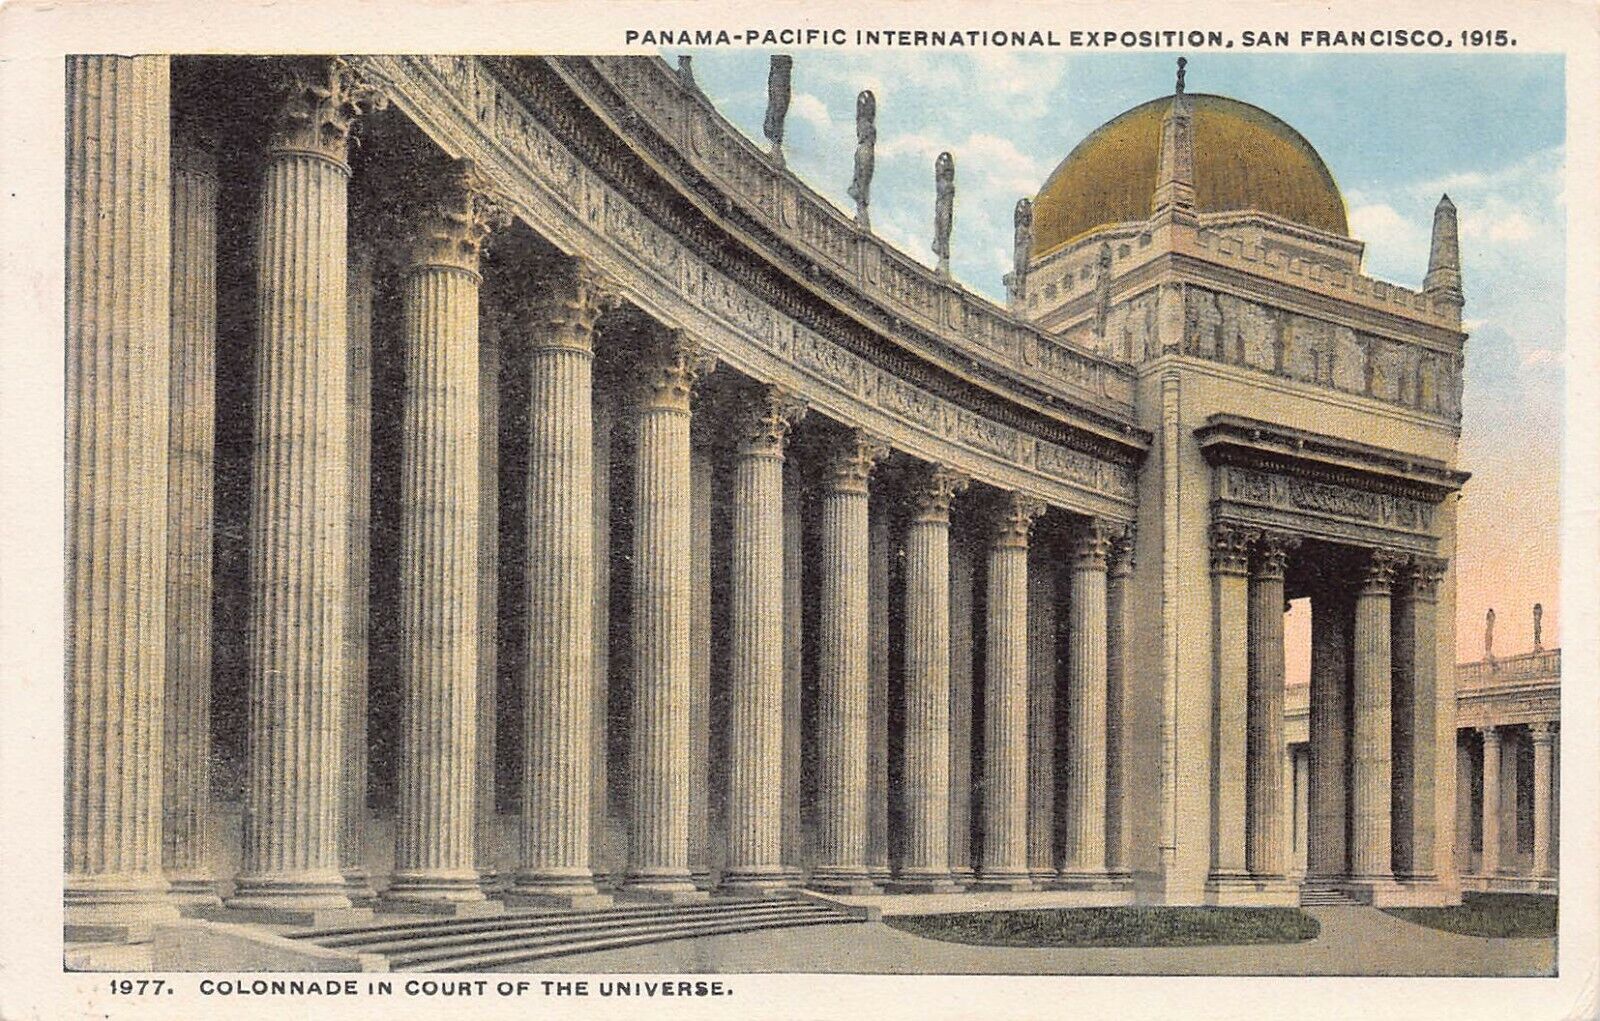 Colonnade in Court of the Universe, 1915 Panama-Pacific Expo, San Francisco, CA.